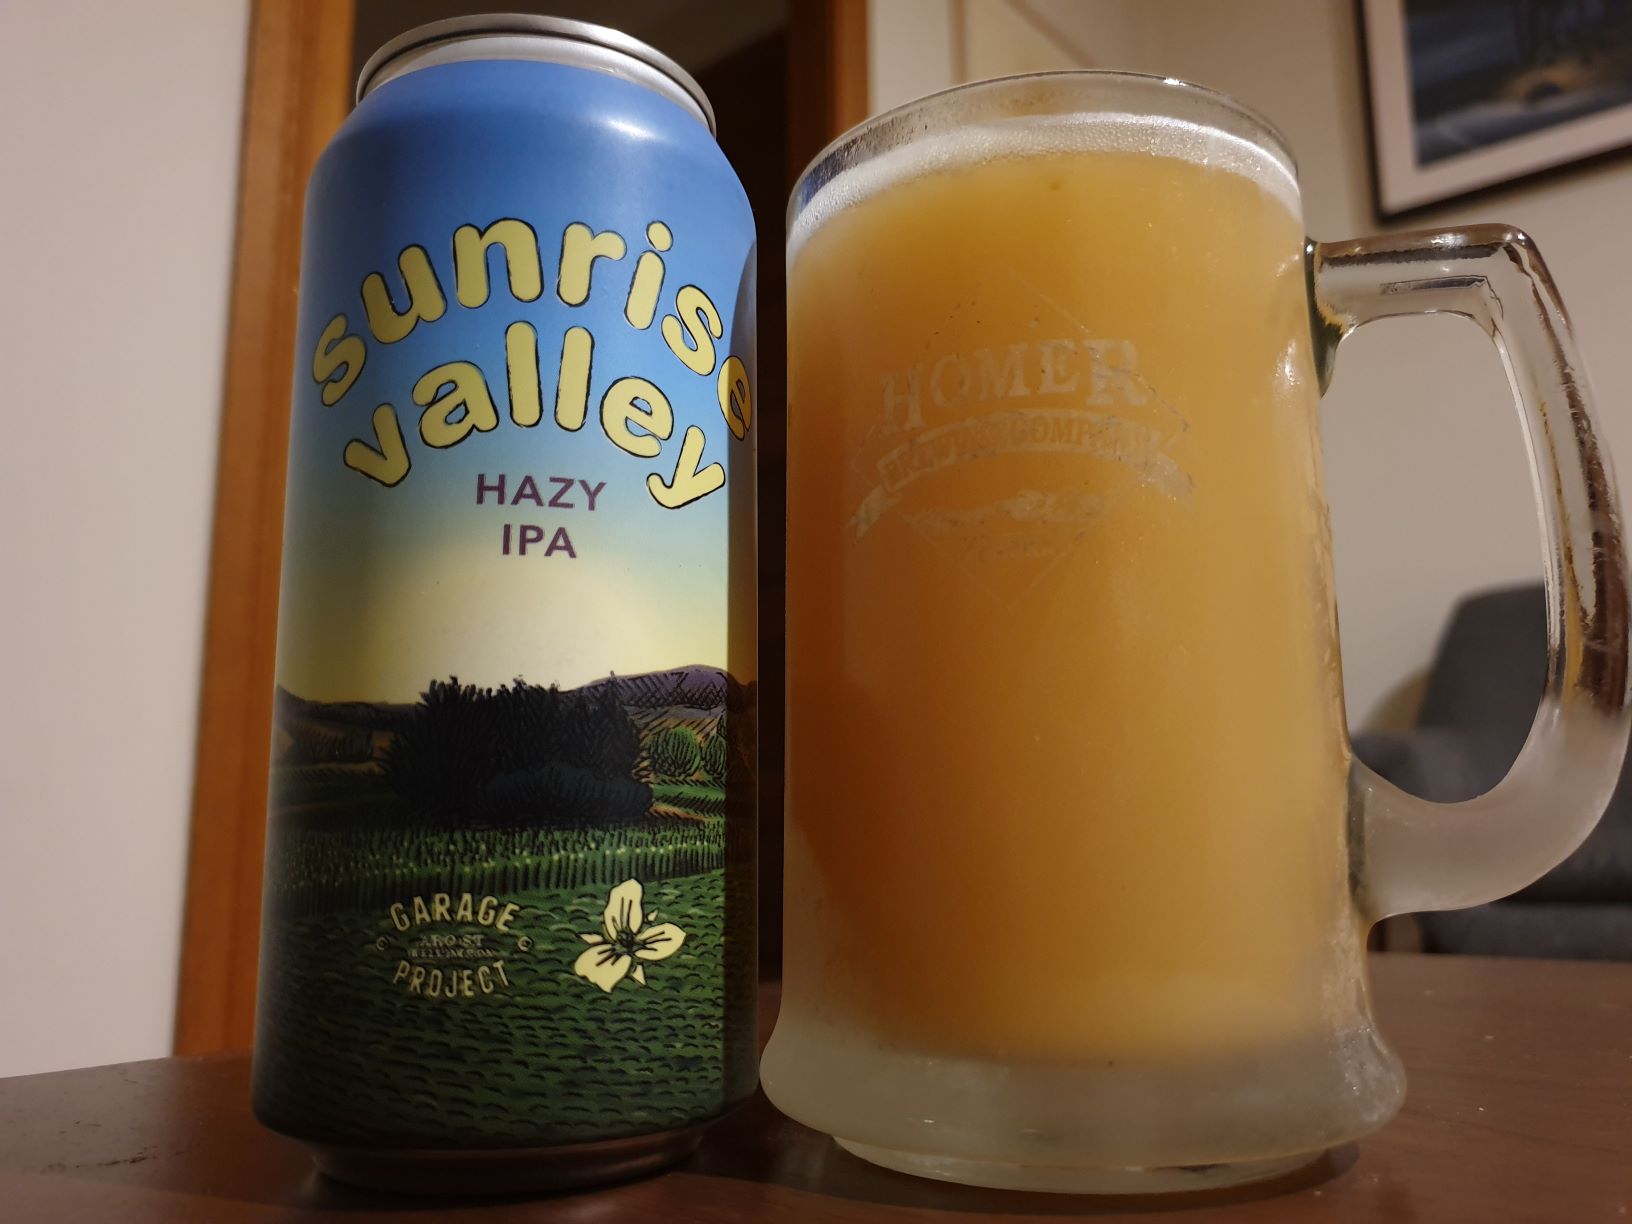 Sunrise Valley Hazy IPA by Garage Project (ft Trillium)